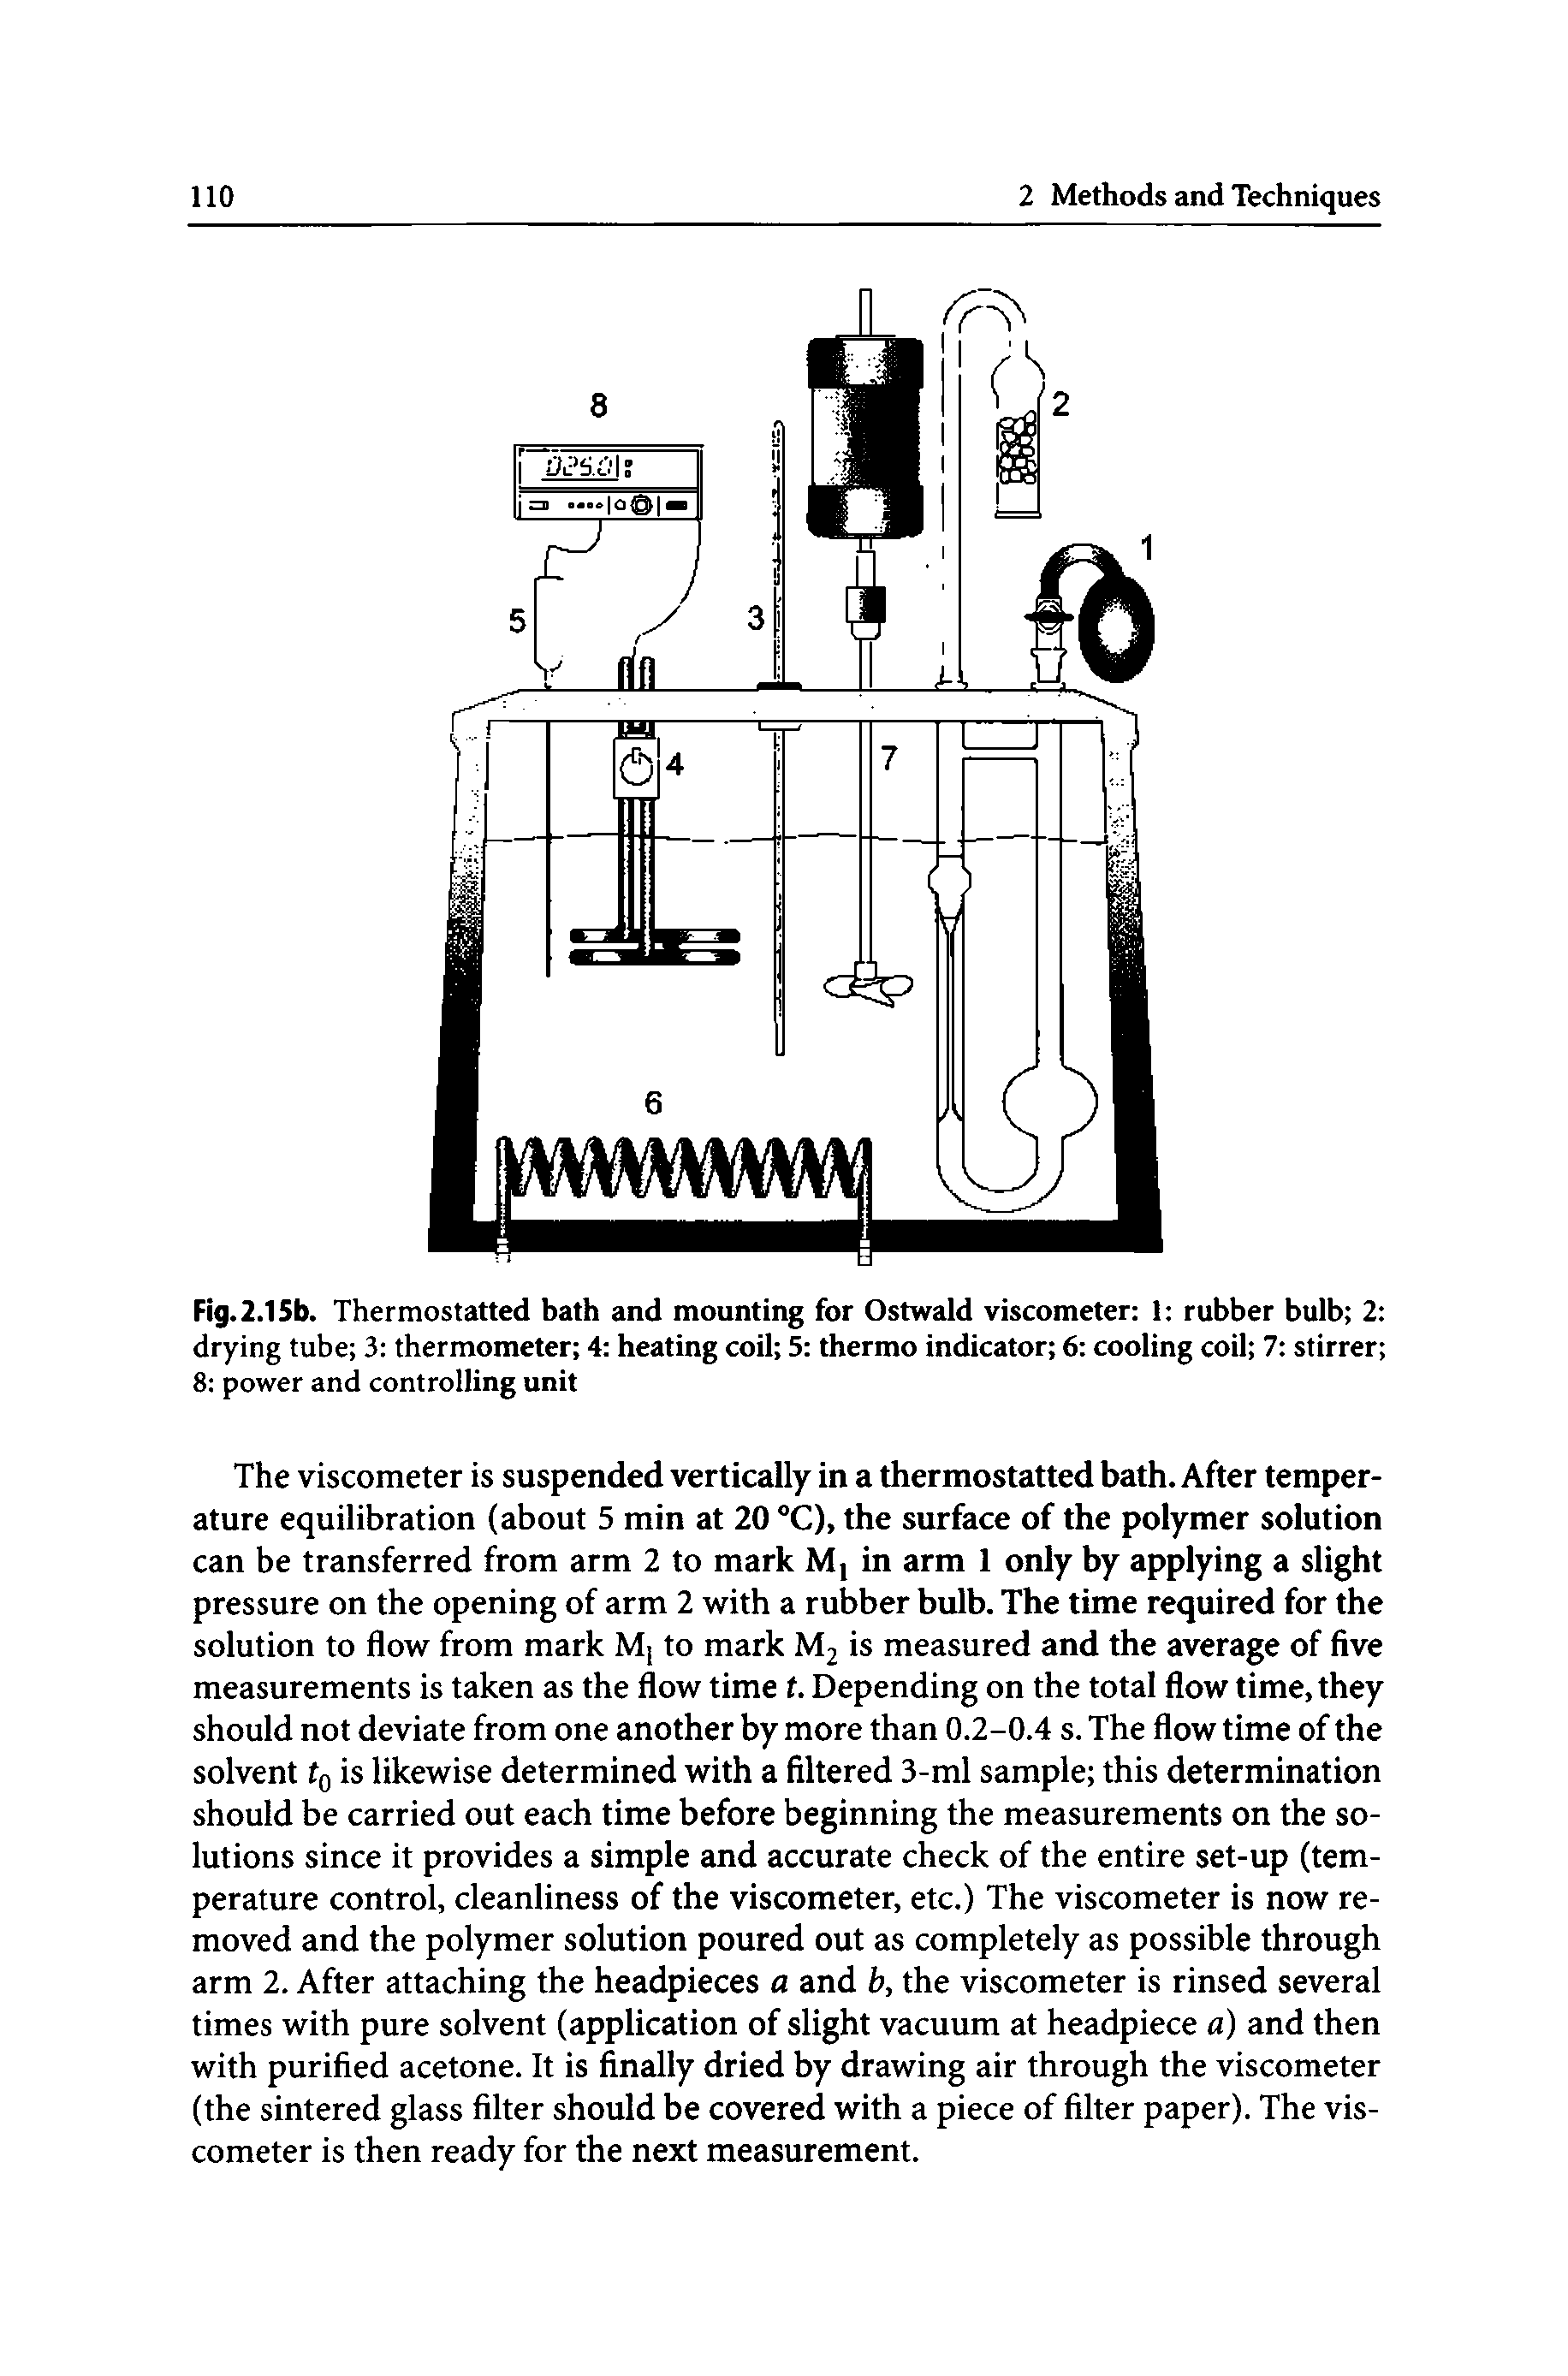 Fig. 2.15b. Thermostatted hath and mounting for Ostwald viscometer 1 rubber bulb 2 drying tube 3 thermometer 4 heating coil 5 thermo indicator 6 cooling coil 7 stirrer 8 power and controlling unit...